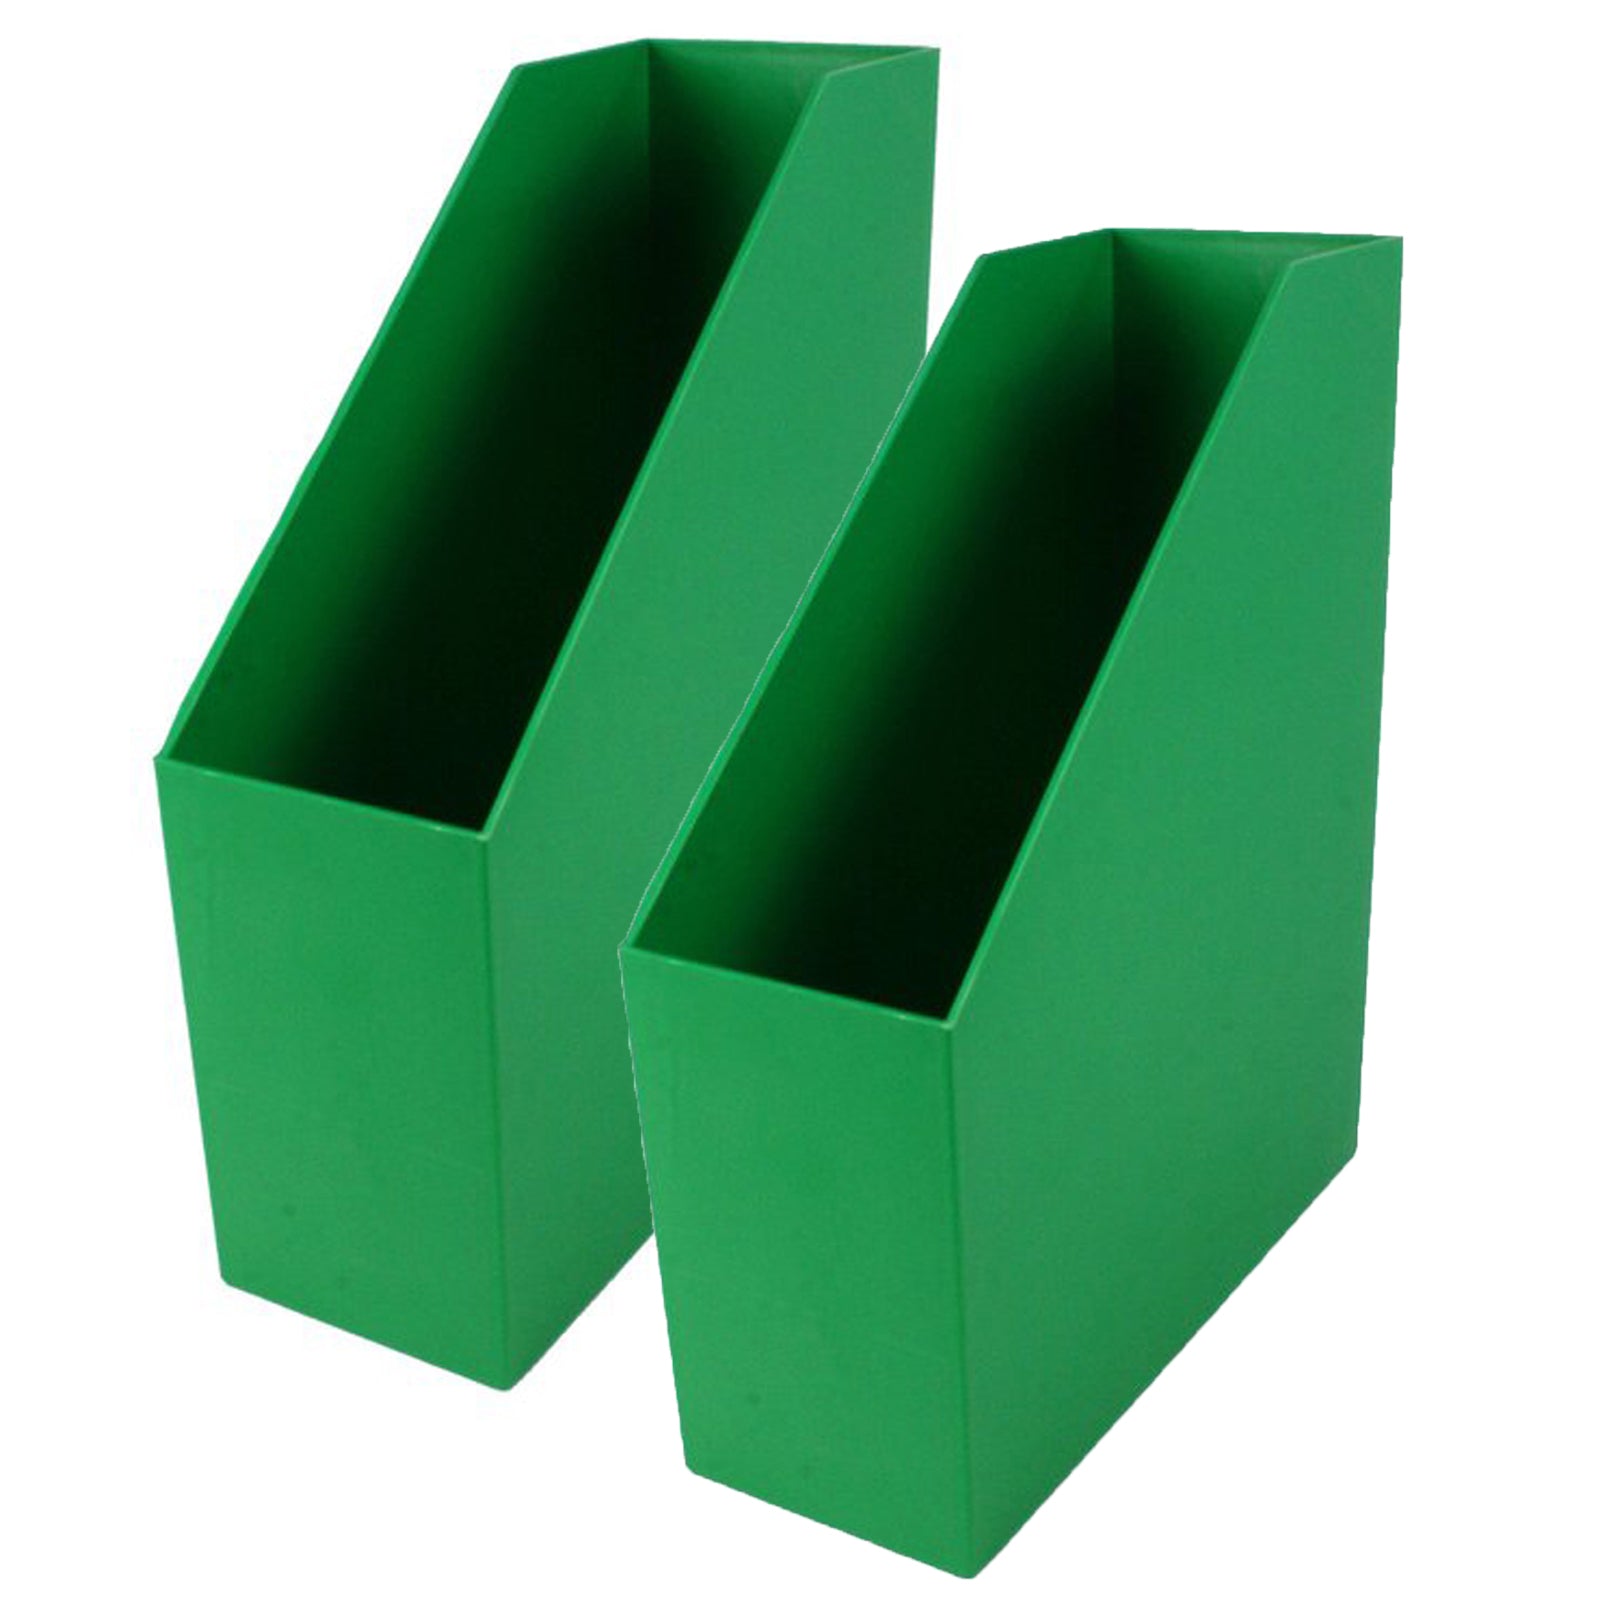 Magazine File, Green, Pack of 2 - A1 School Supplies